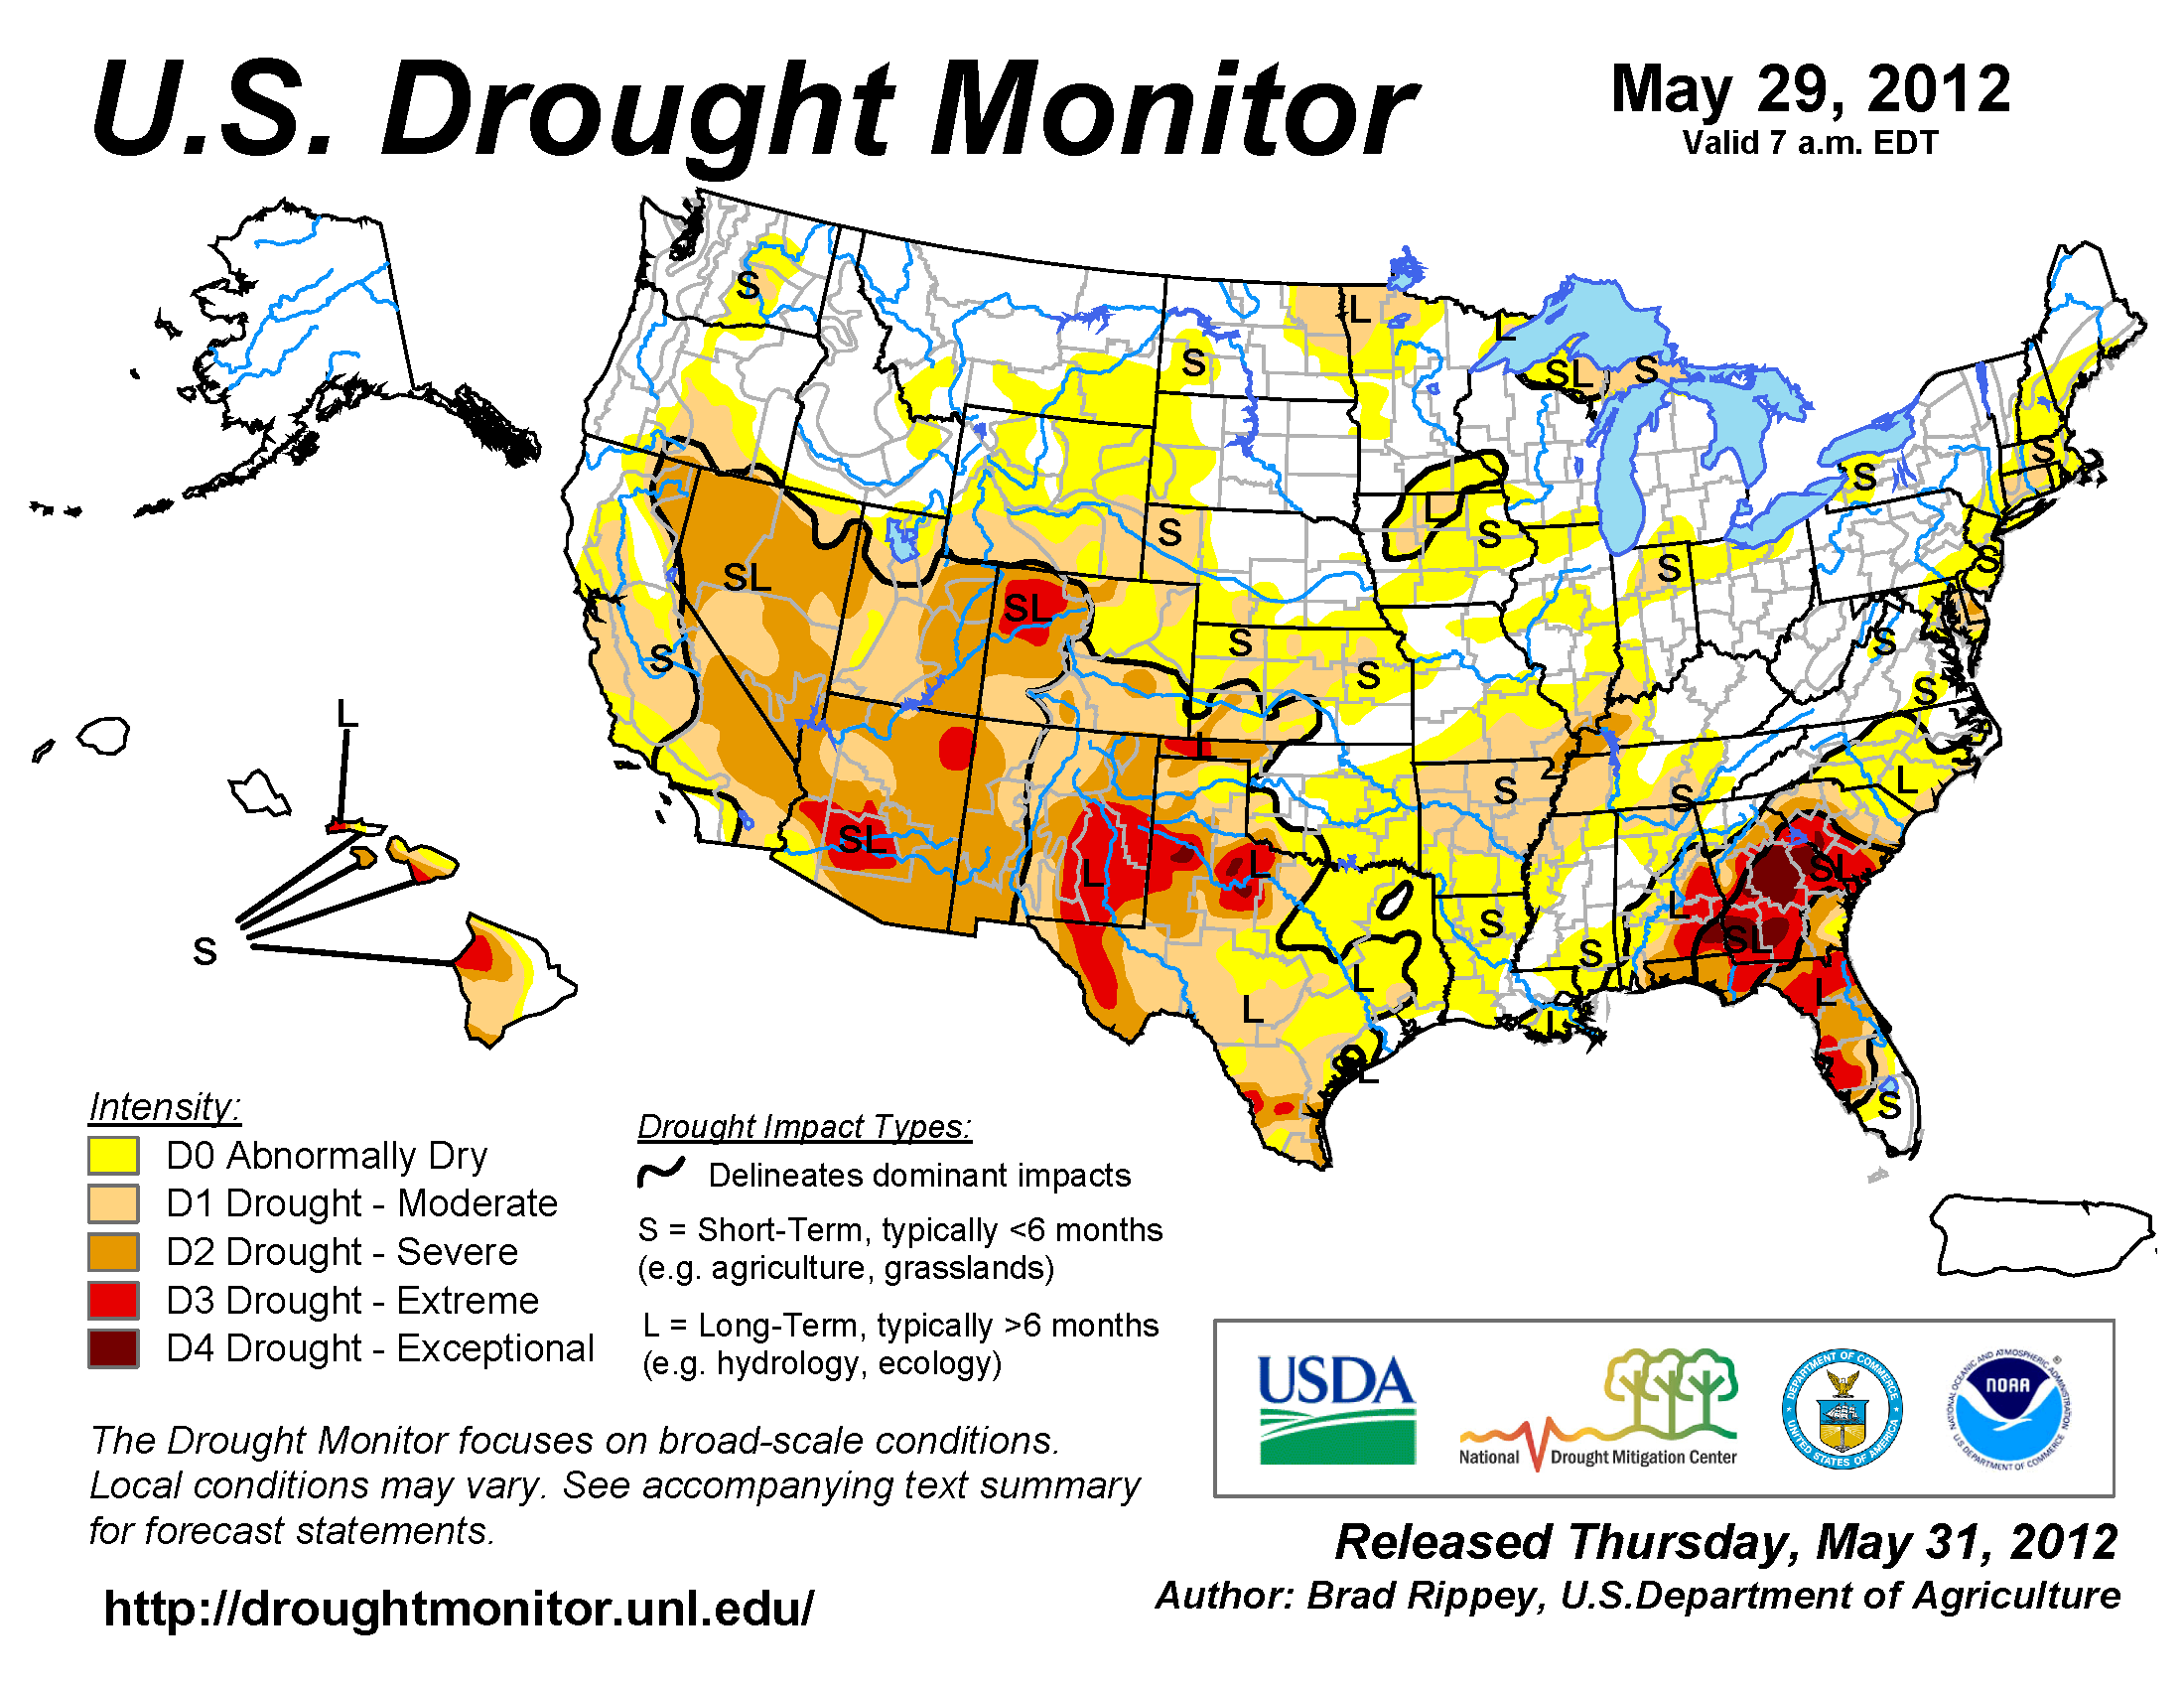 Where are the drought areas in new mexico?